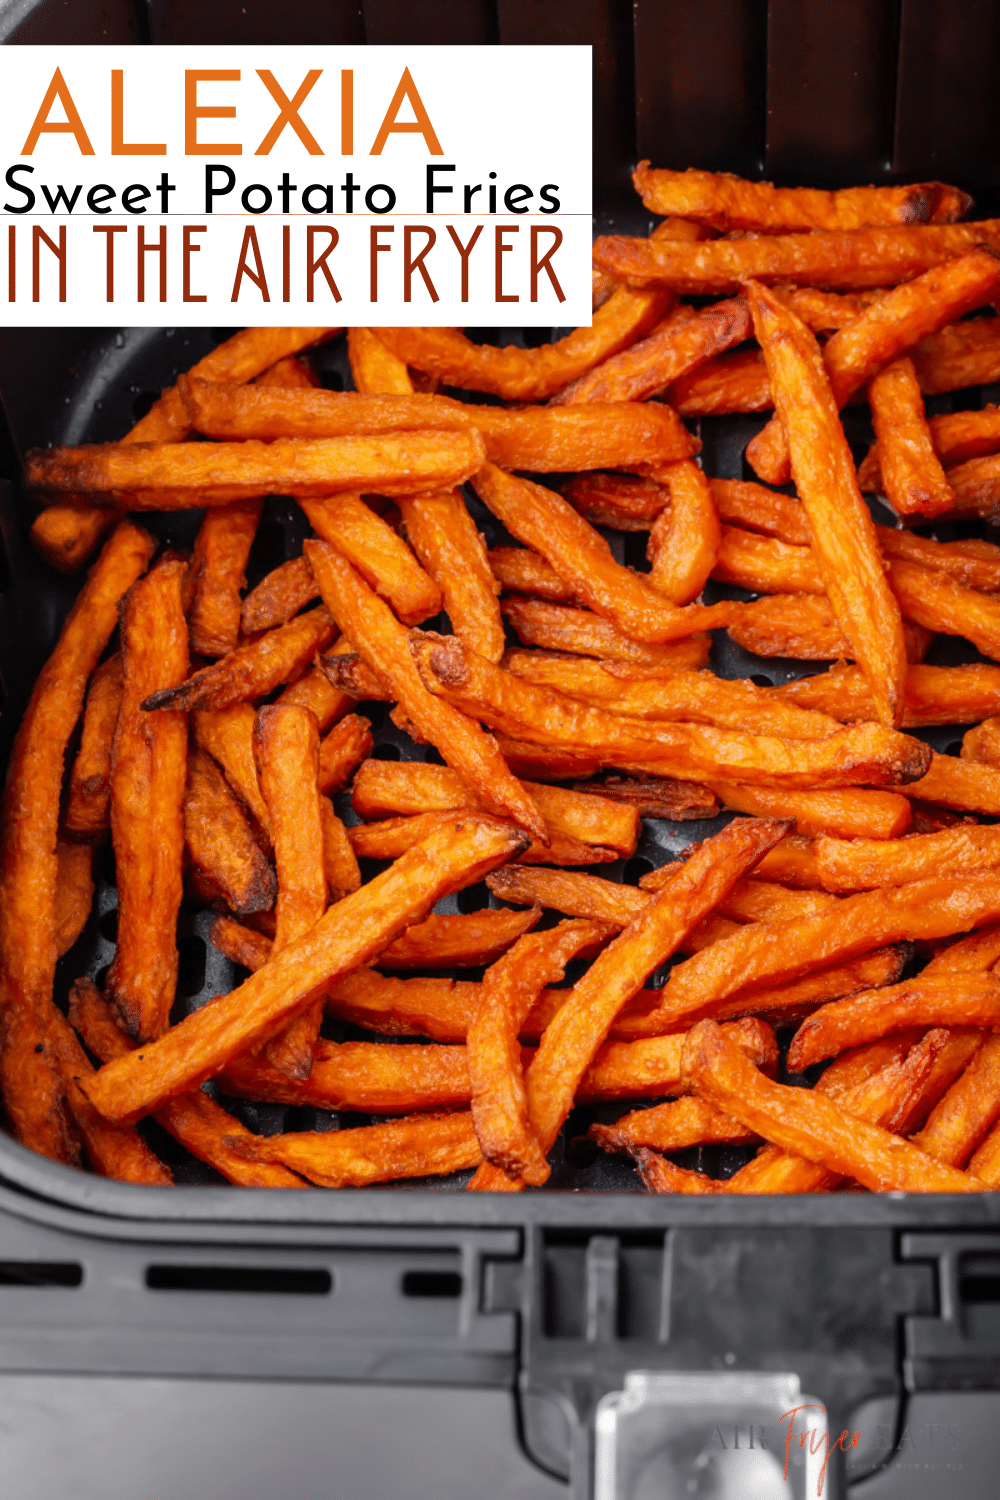 Alexia Sweet Potato Fries in the Air Fryer cook up crazy fast and are ultra crispy. Serve these frozen sweet potato fries with your favorite dipping sauce. | Alexia Sweet Potato Fries | Air Fryer Sweet Potato Fries | Air Fryer Fries